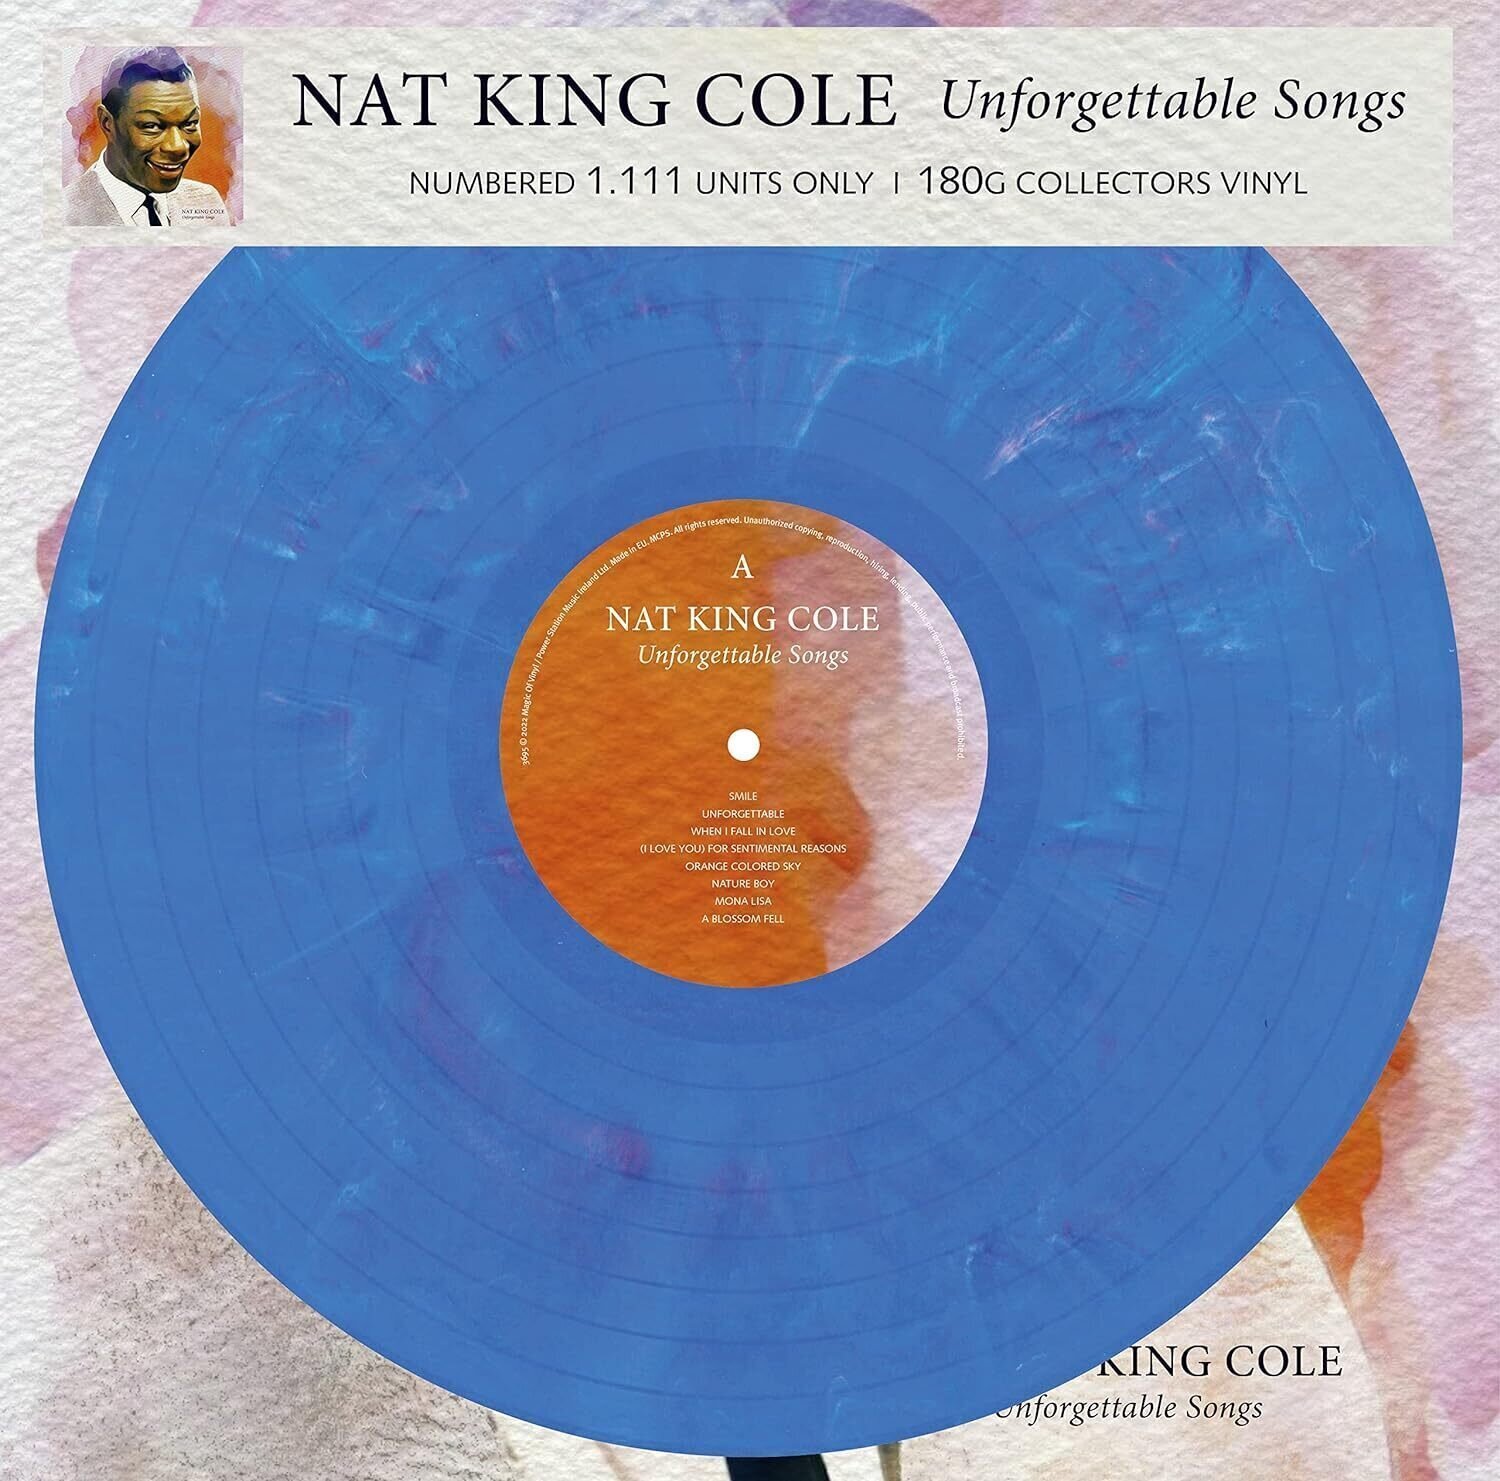 Disc de vinil Nat King Cole - Unforgettable Songs (Limited Edition) (Numbered) (Blue Marbled Coloured) (LP)